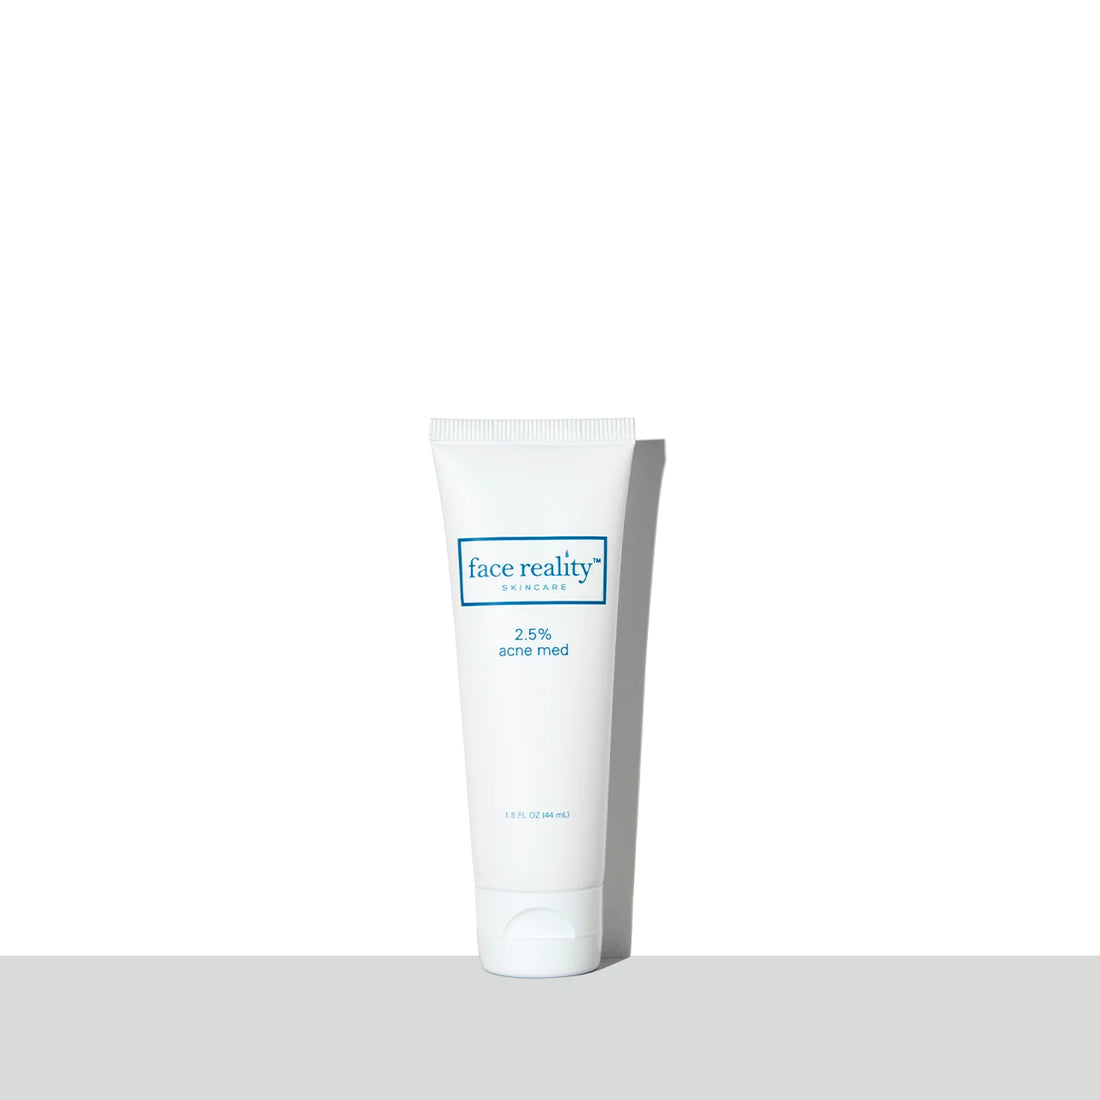 Face Reality | 2.5% ACNE MED 1.5 OZ Product